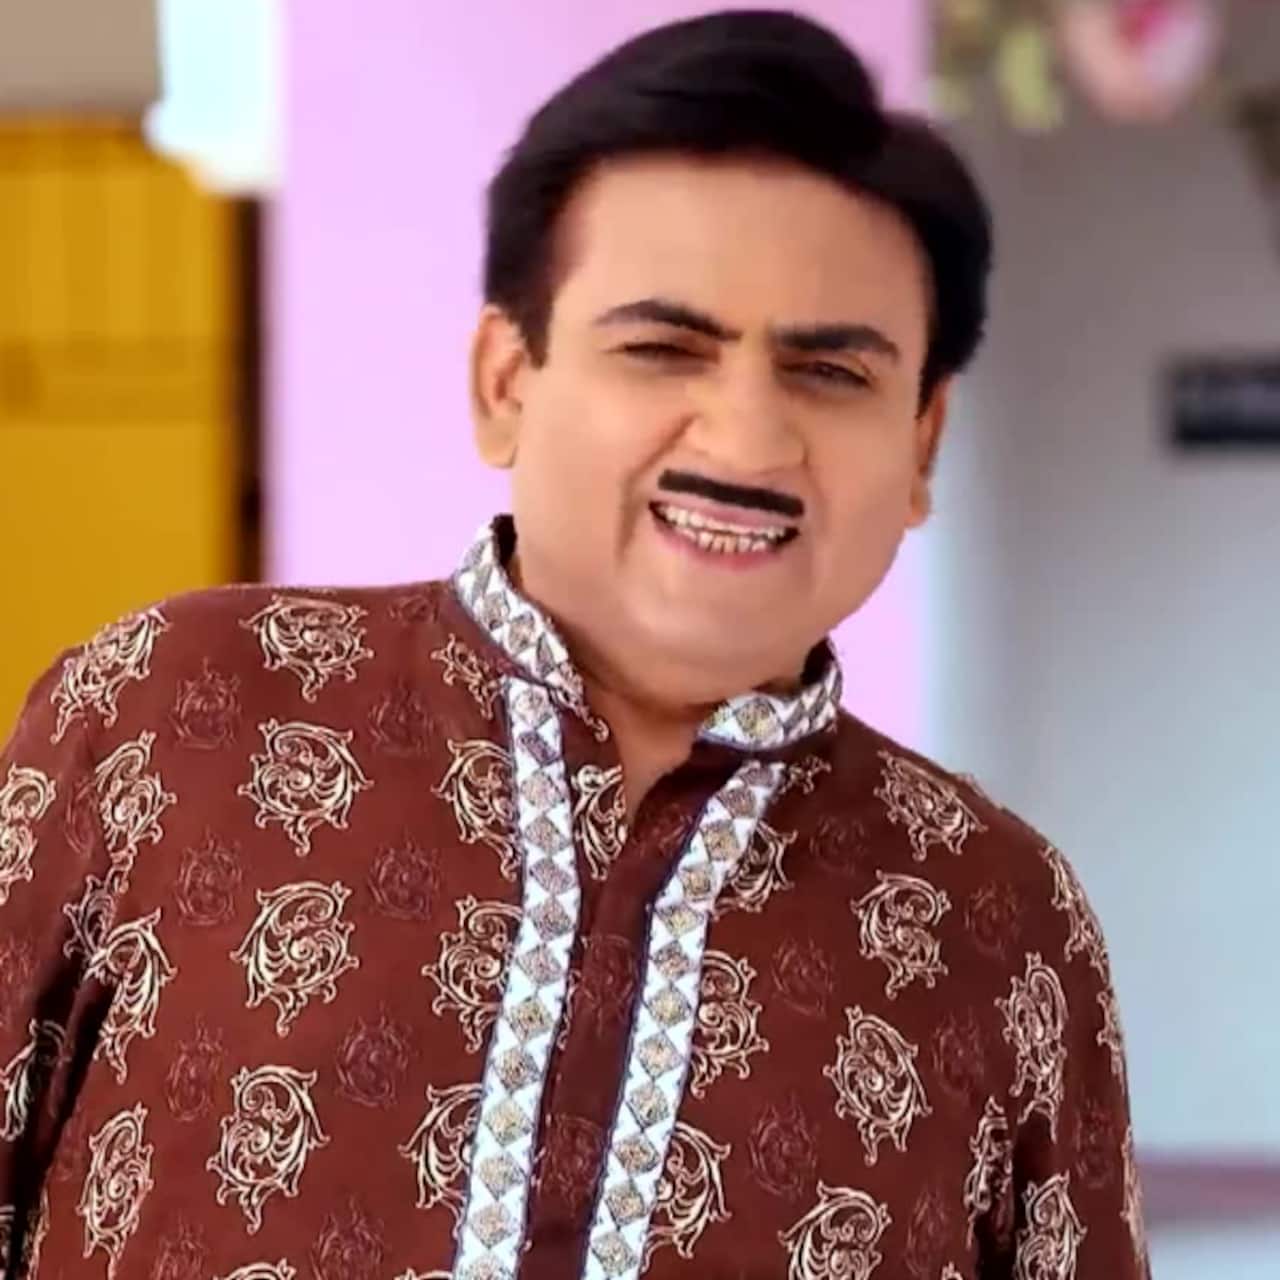 Jethalal played by Dilip Joshi